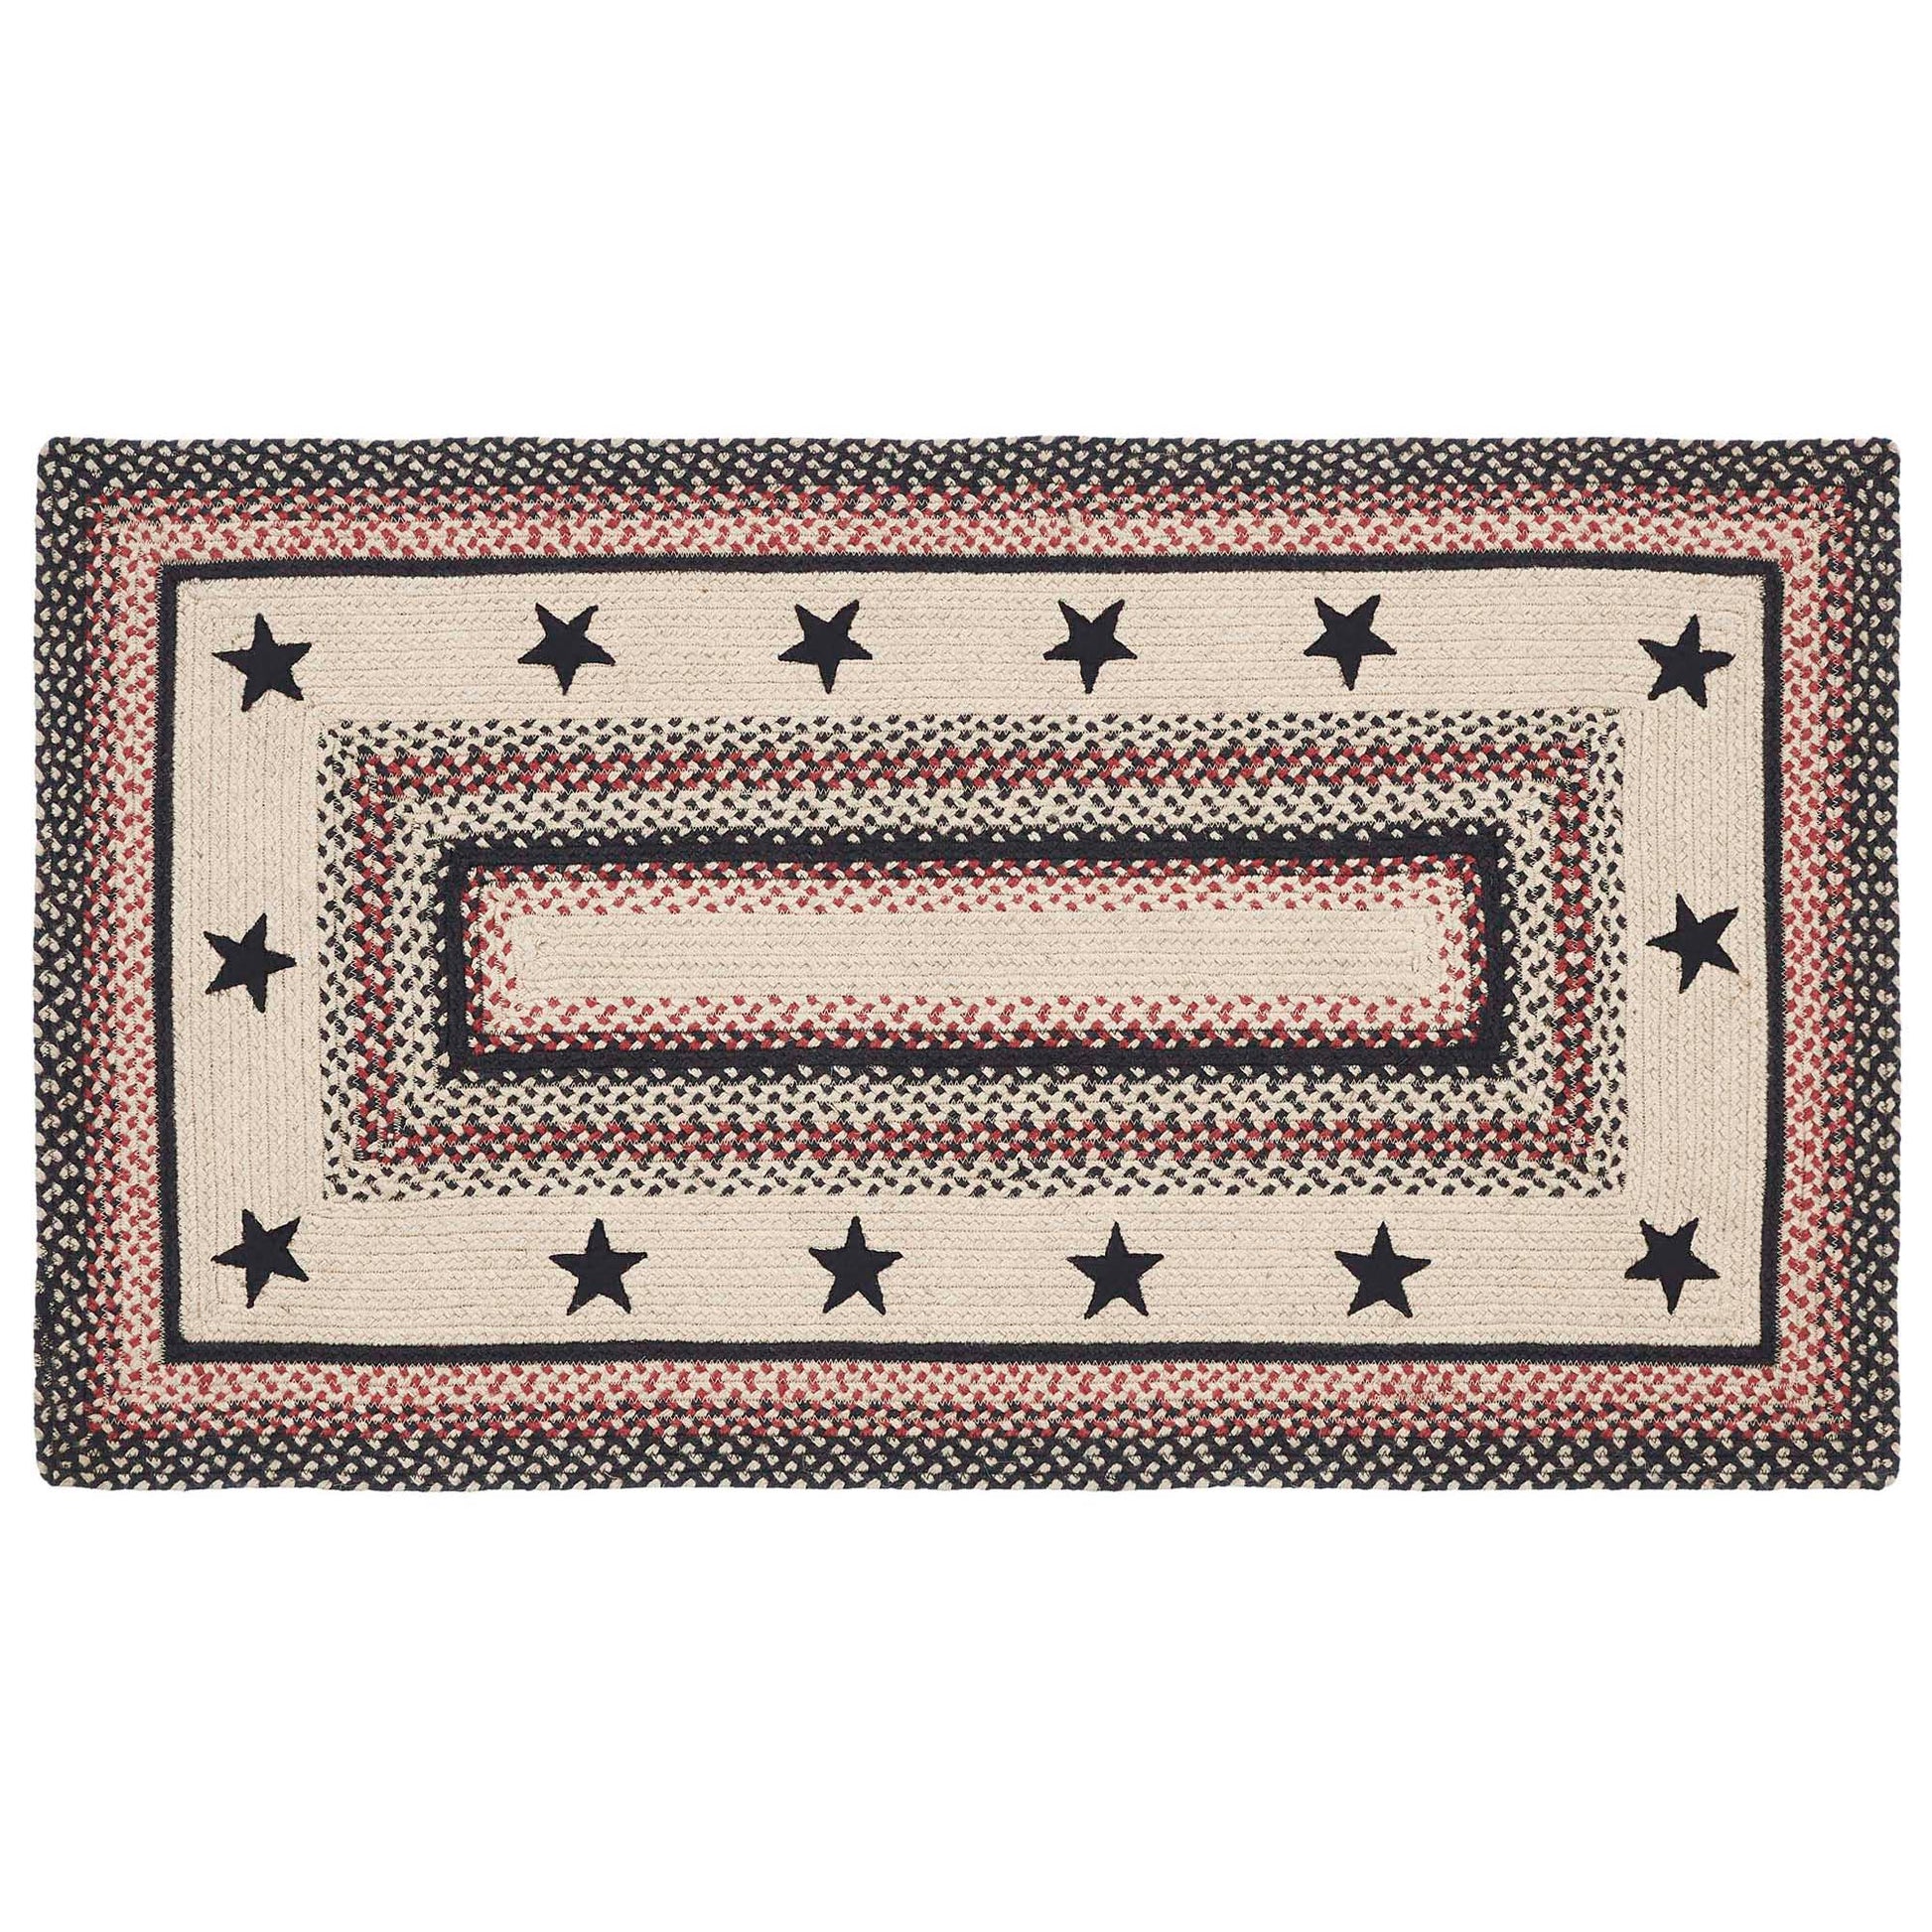 67013-Colonial-Star-Jute-Rug-Rect-w-Pad-27x48-image-1